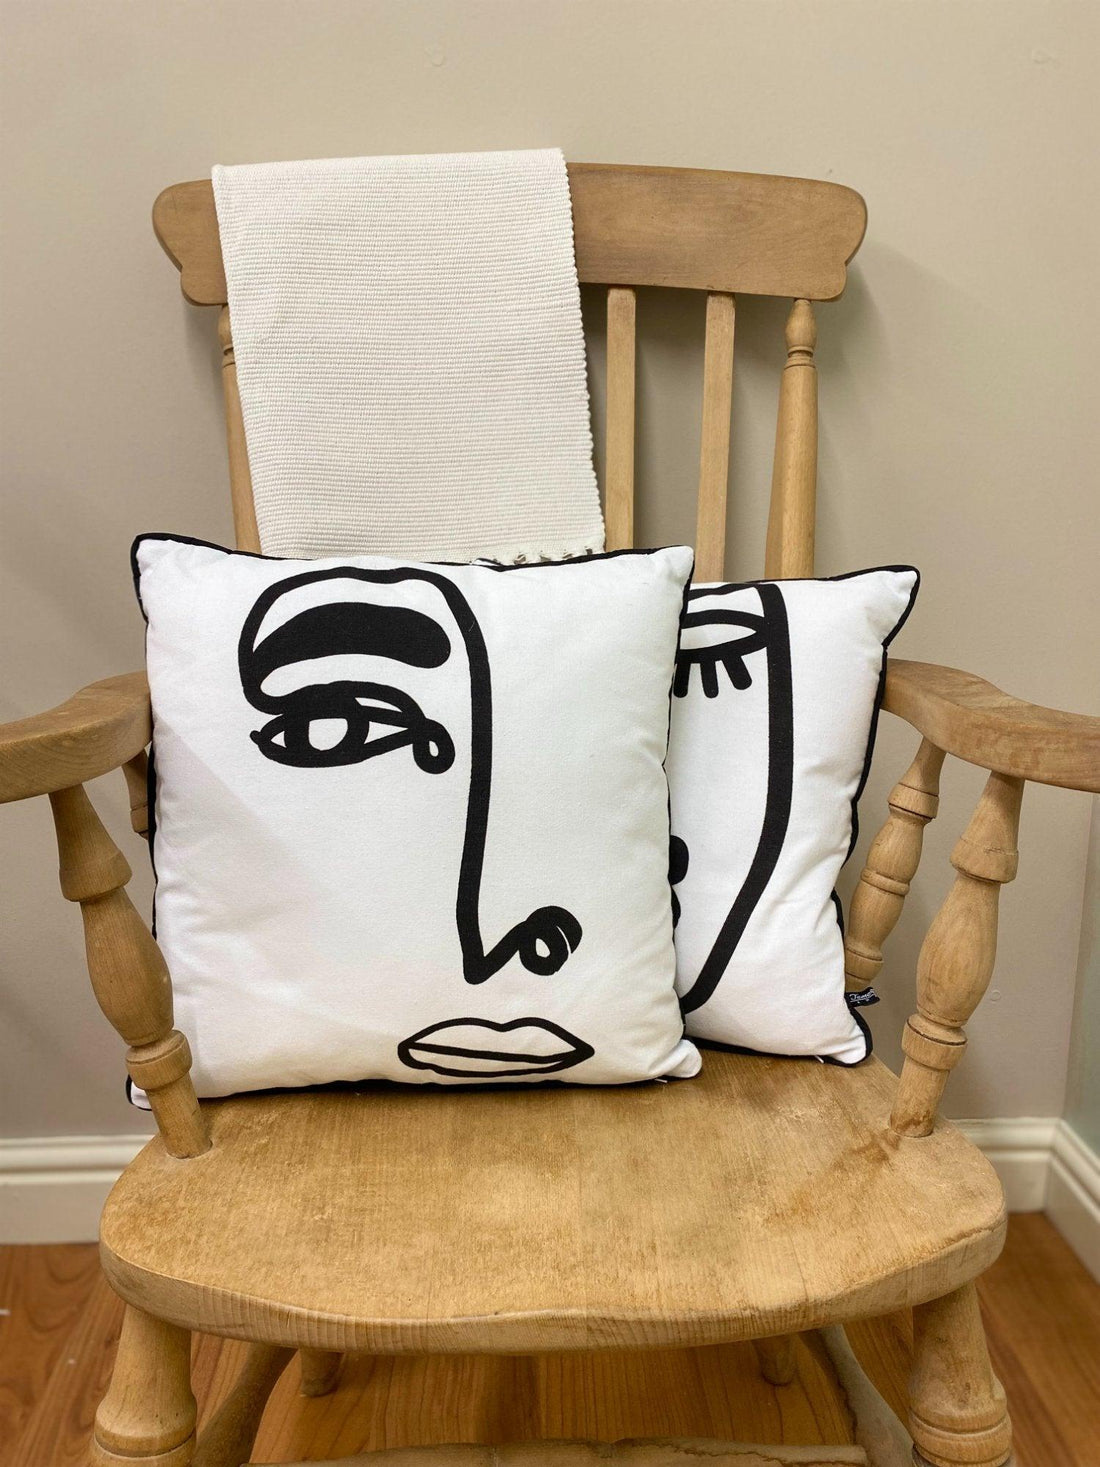 Face Print Scatter Cushions - £52.99 - Throw Pillows 